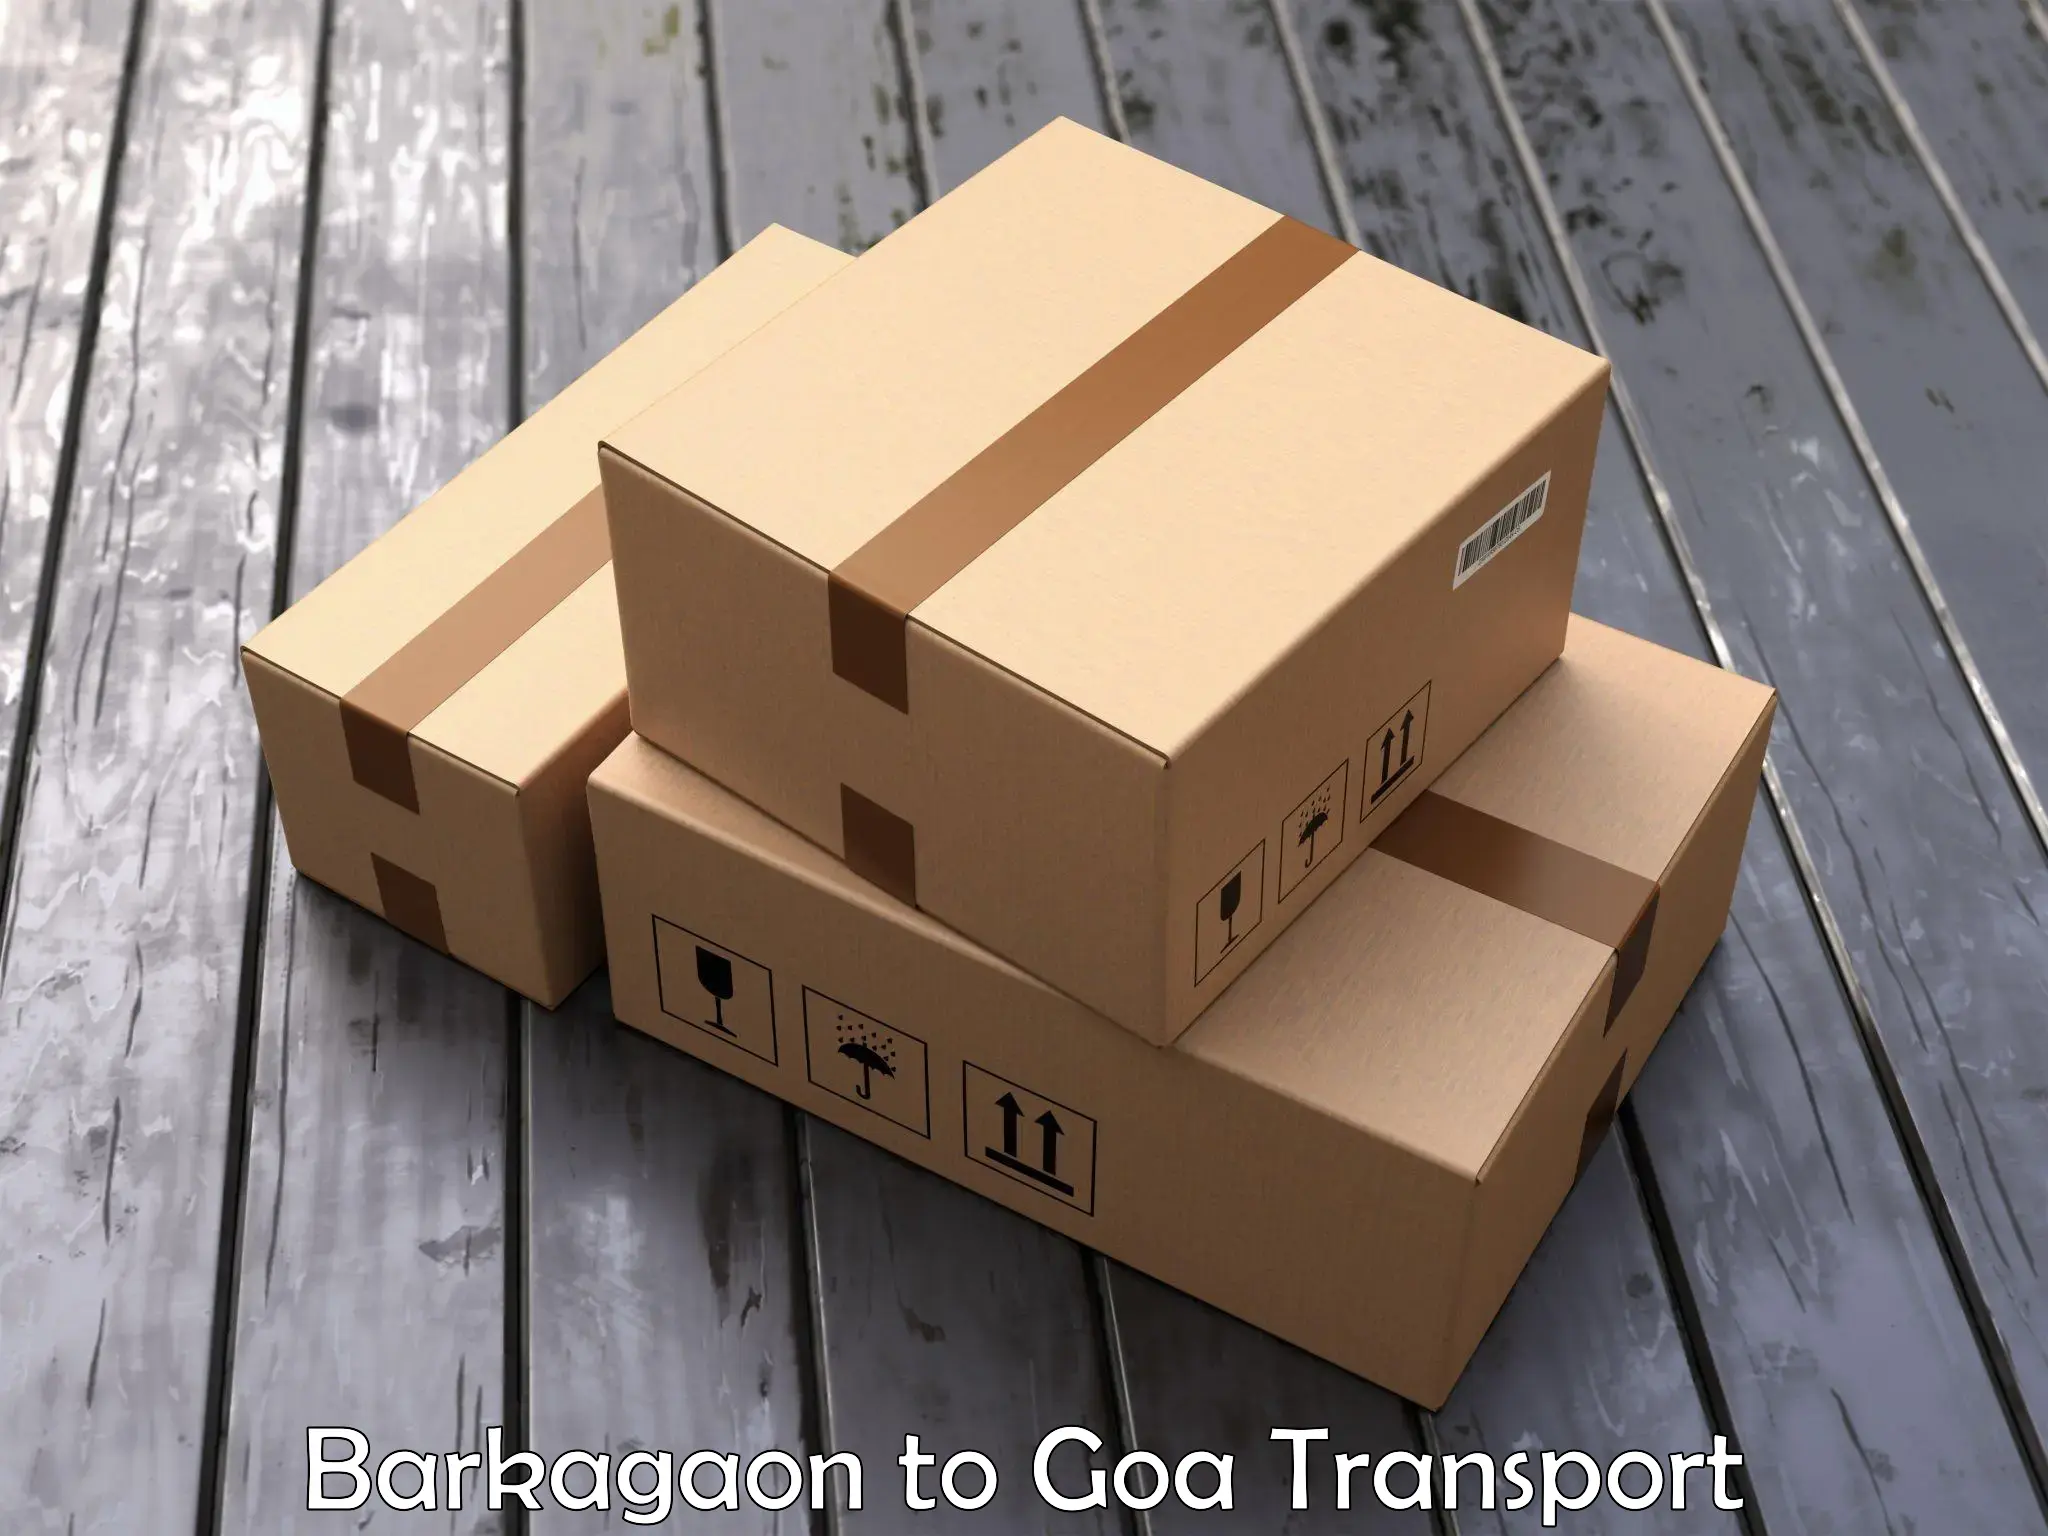 Container transport service Barkagaon to Panjim